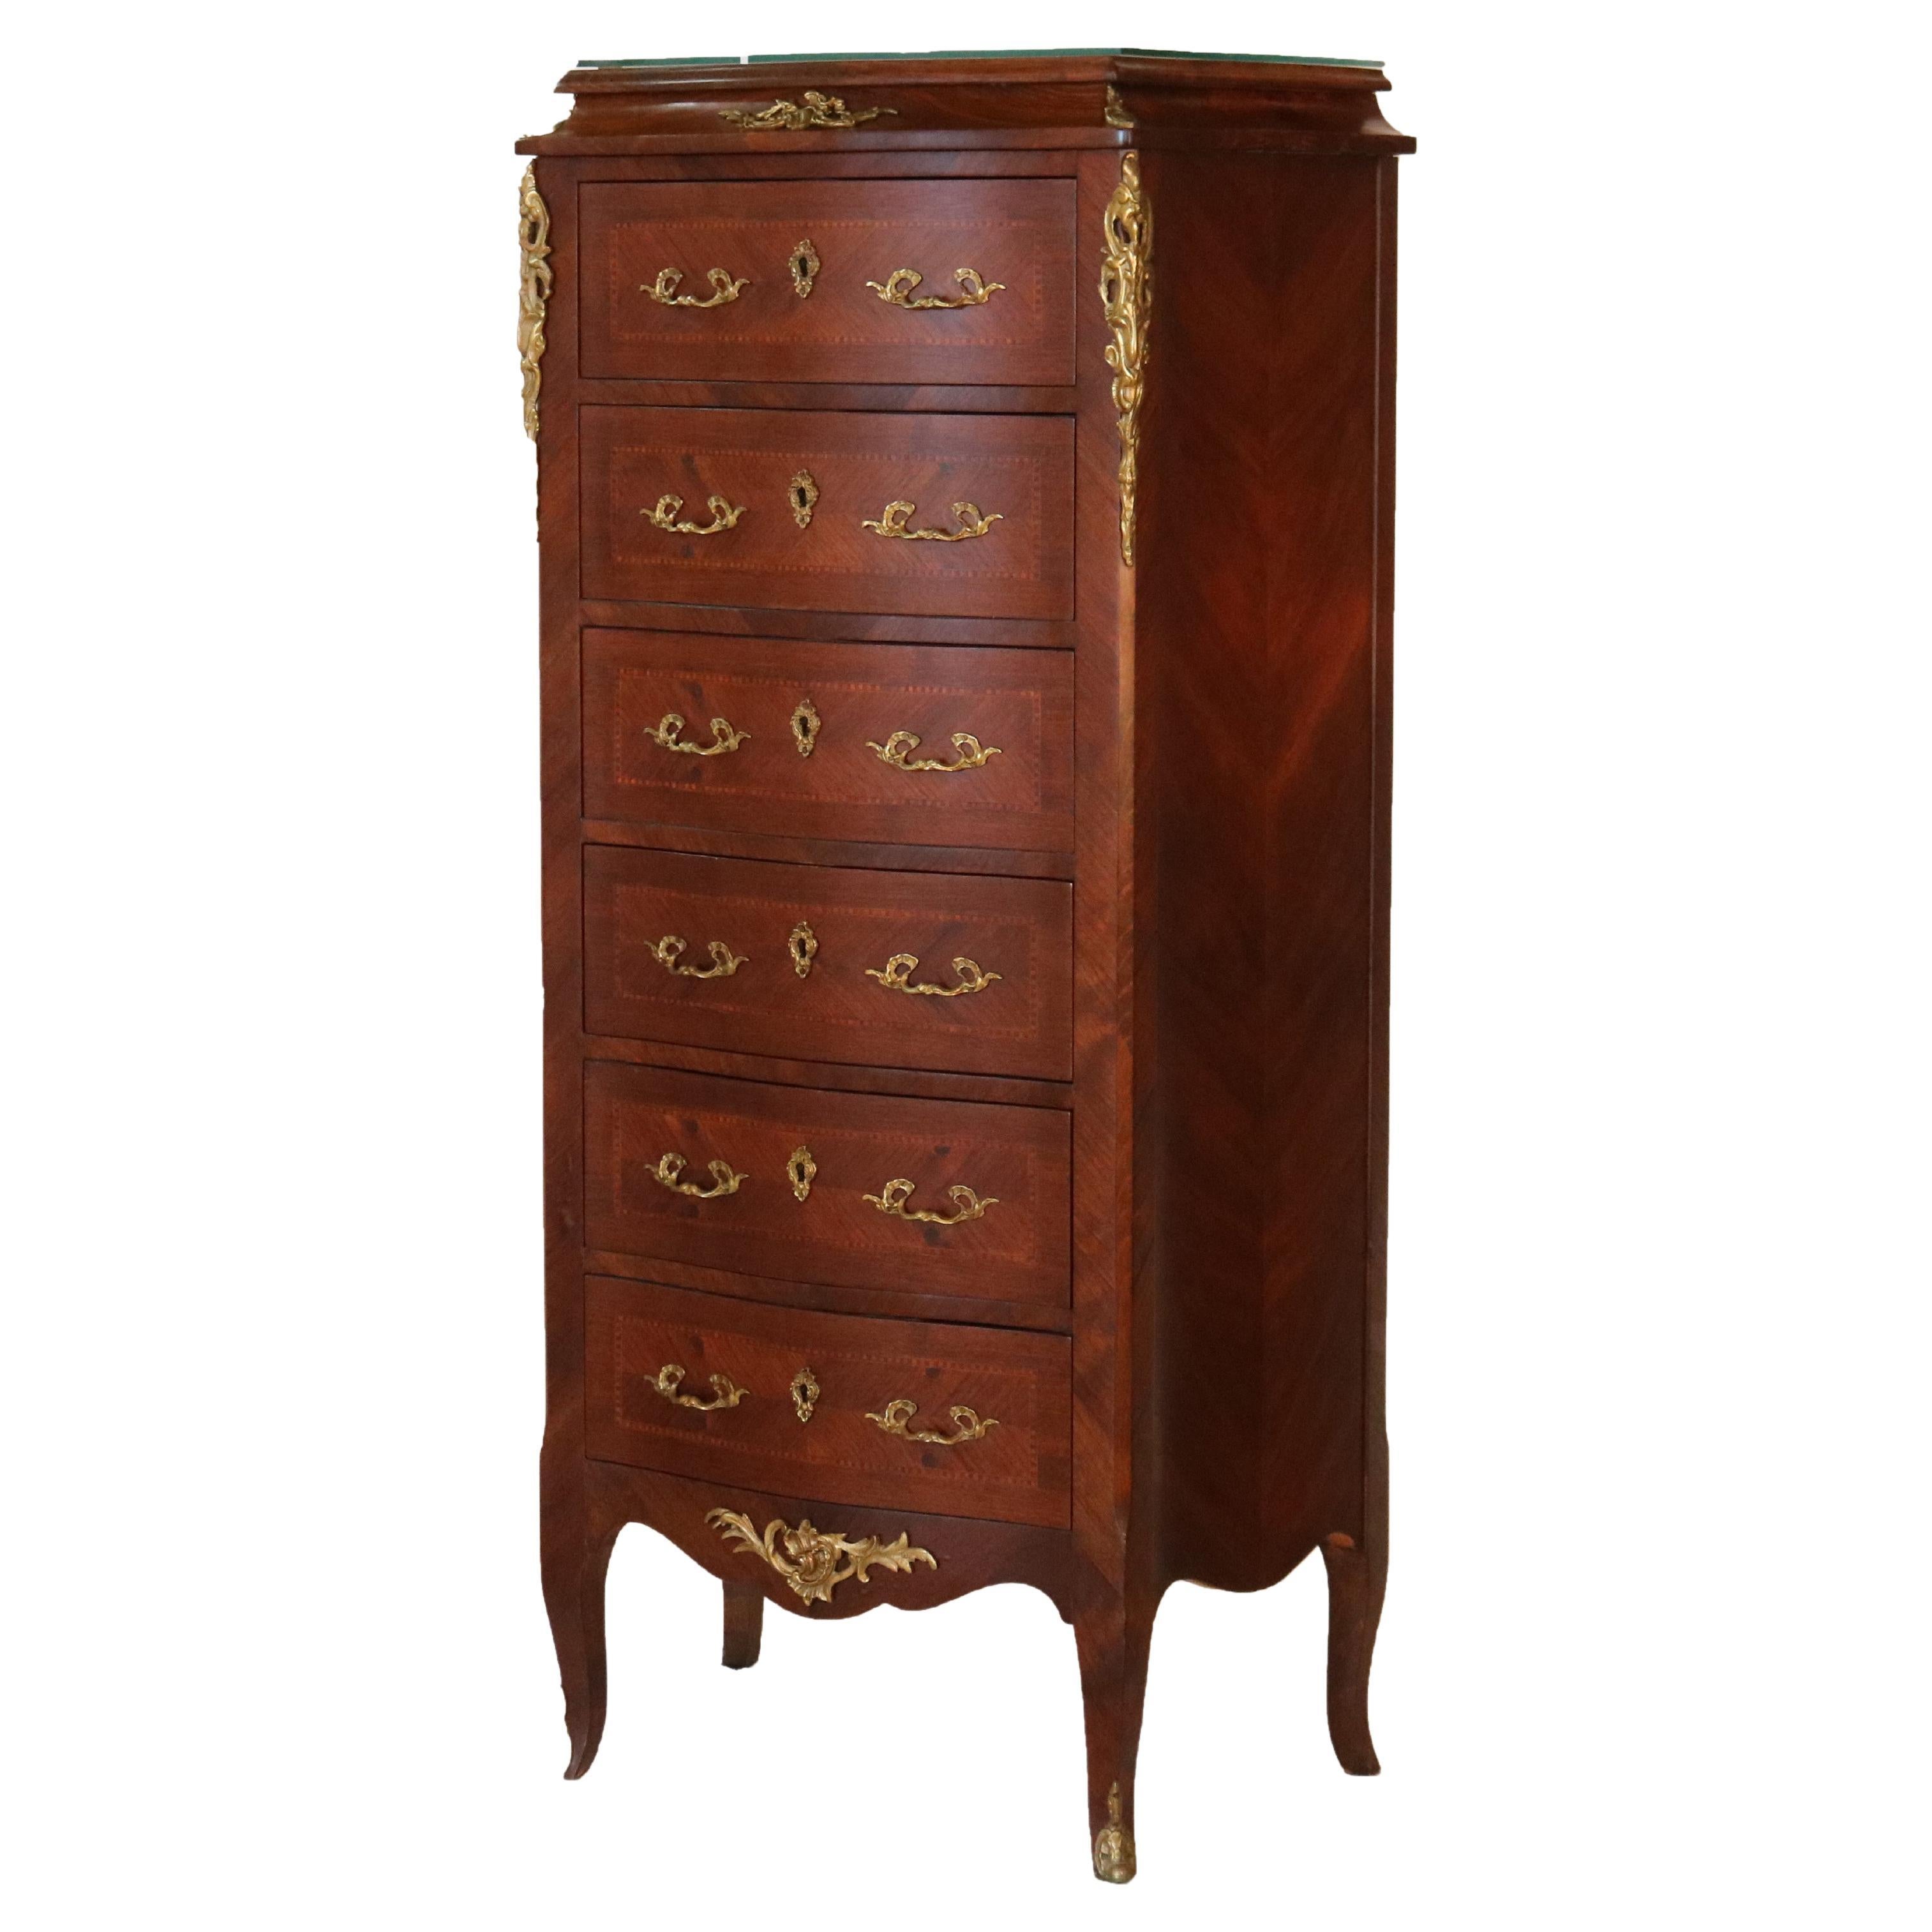 French Louis XIV Style Kingwood & Satinwood Inlaid Lingerie Chest, 20th Century